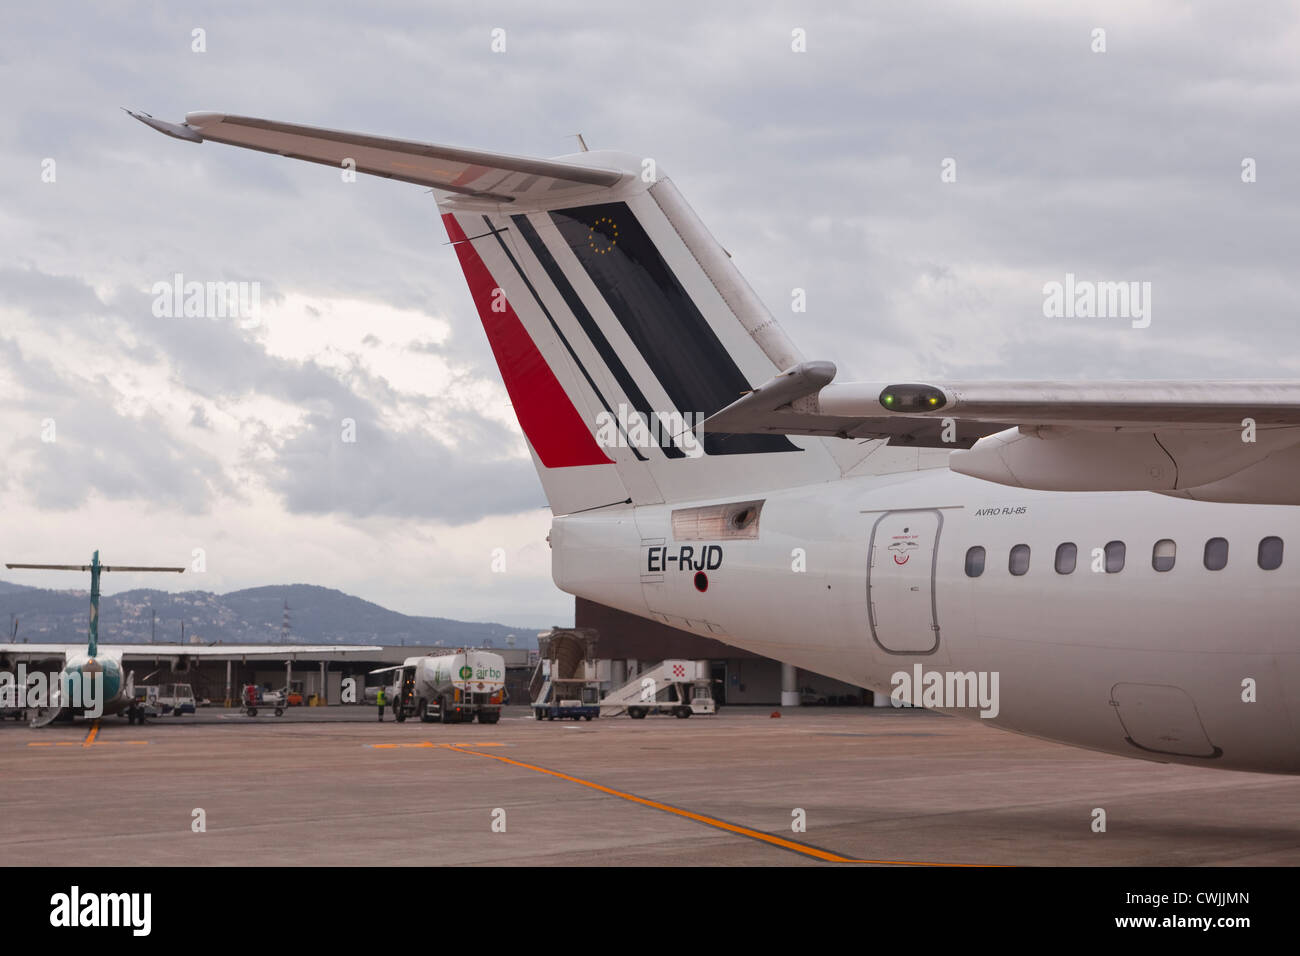 A CityJet operated by Air France waits departure. Stock Photo